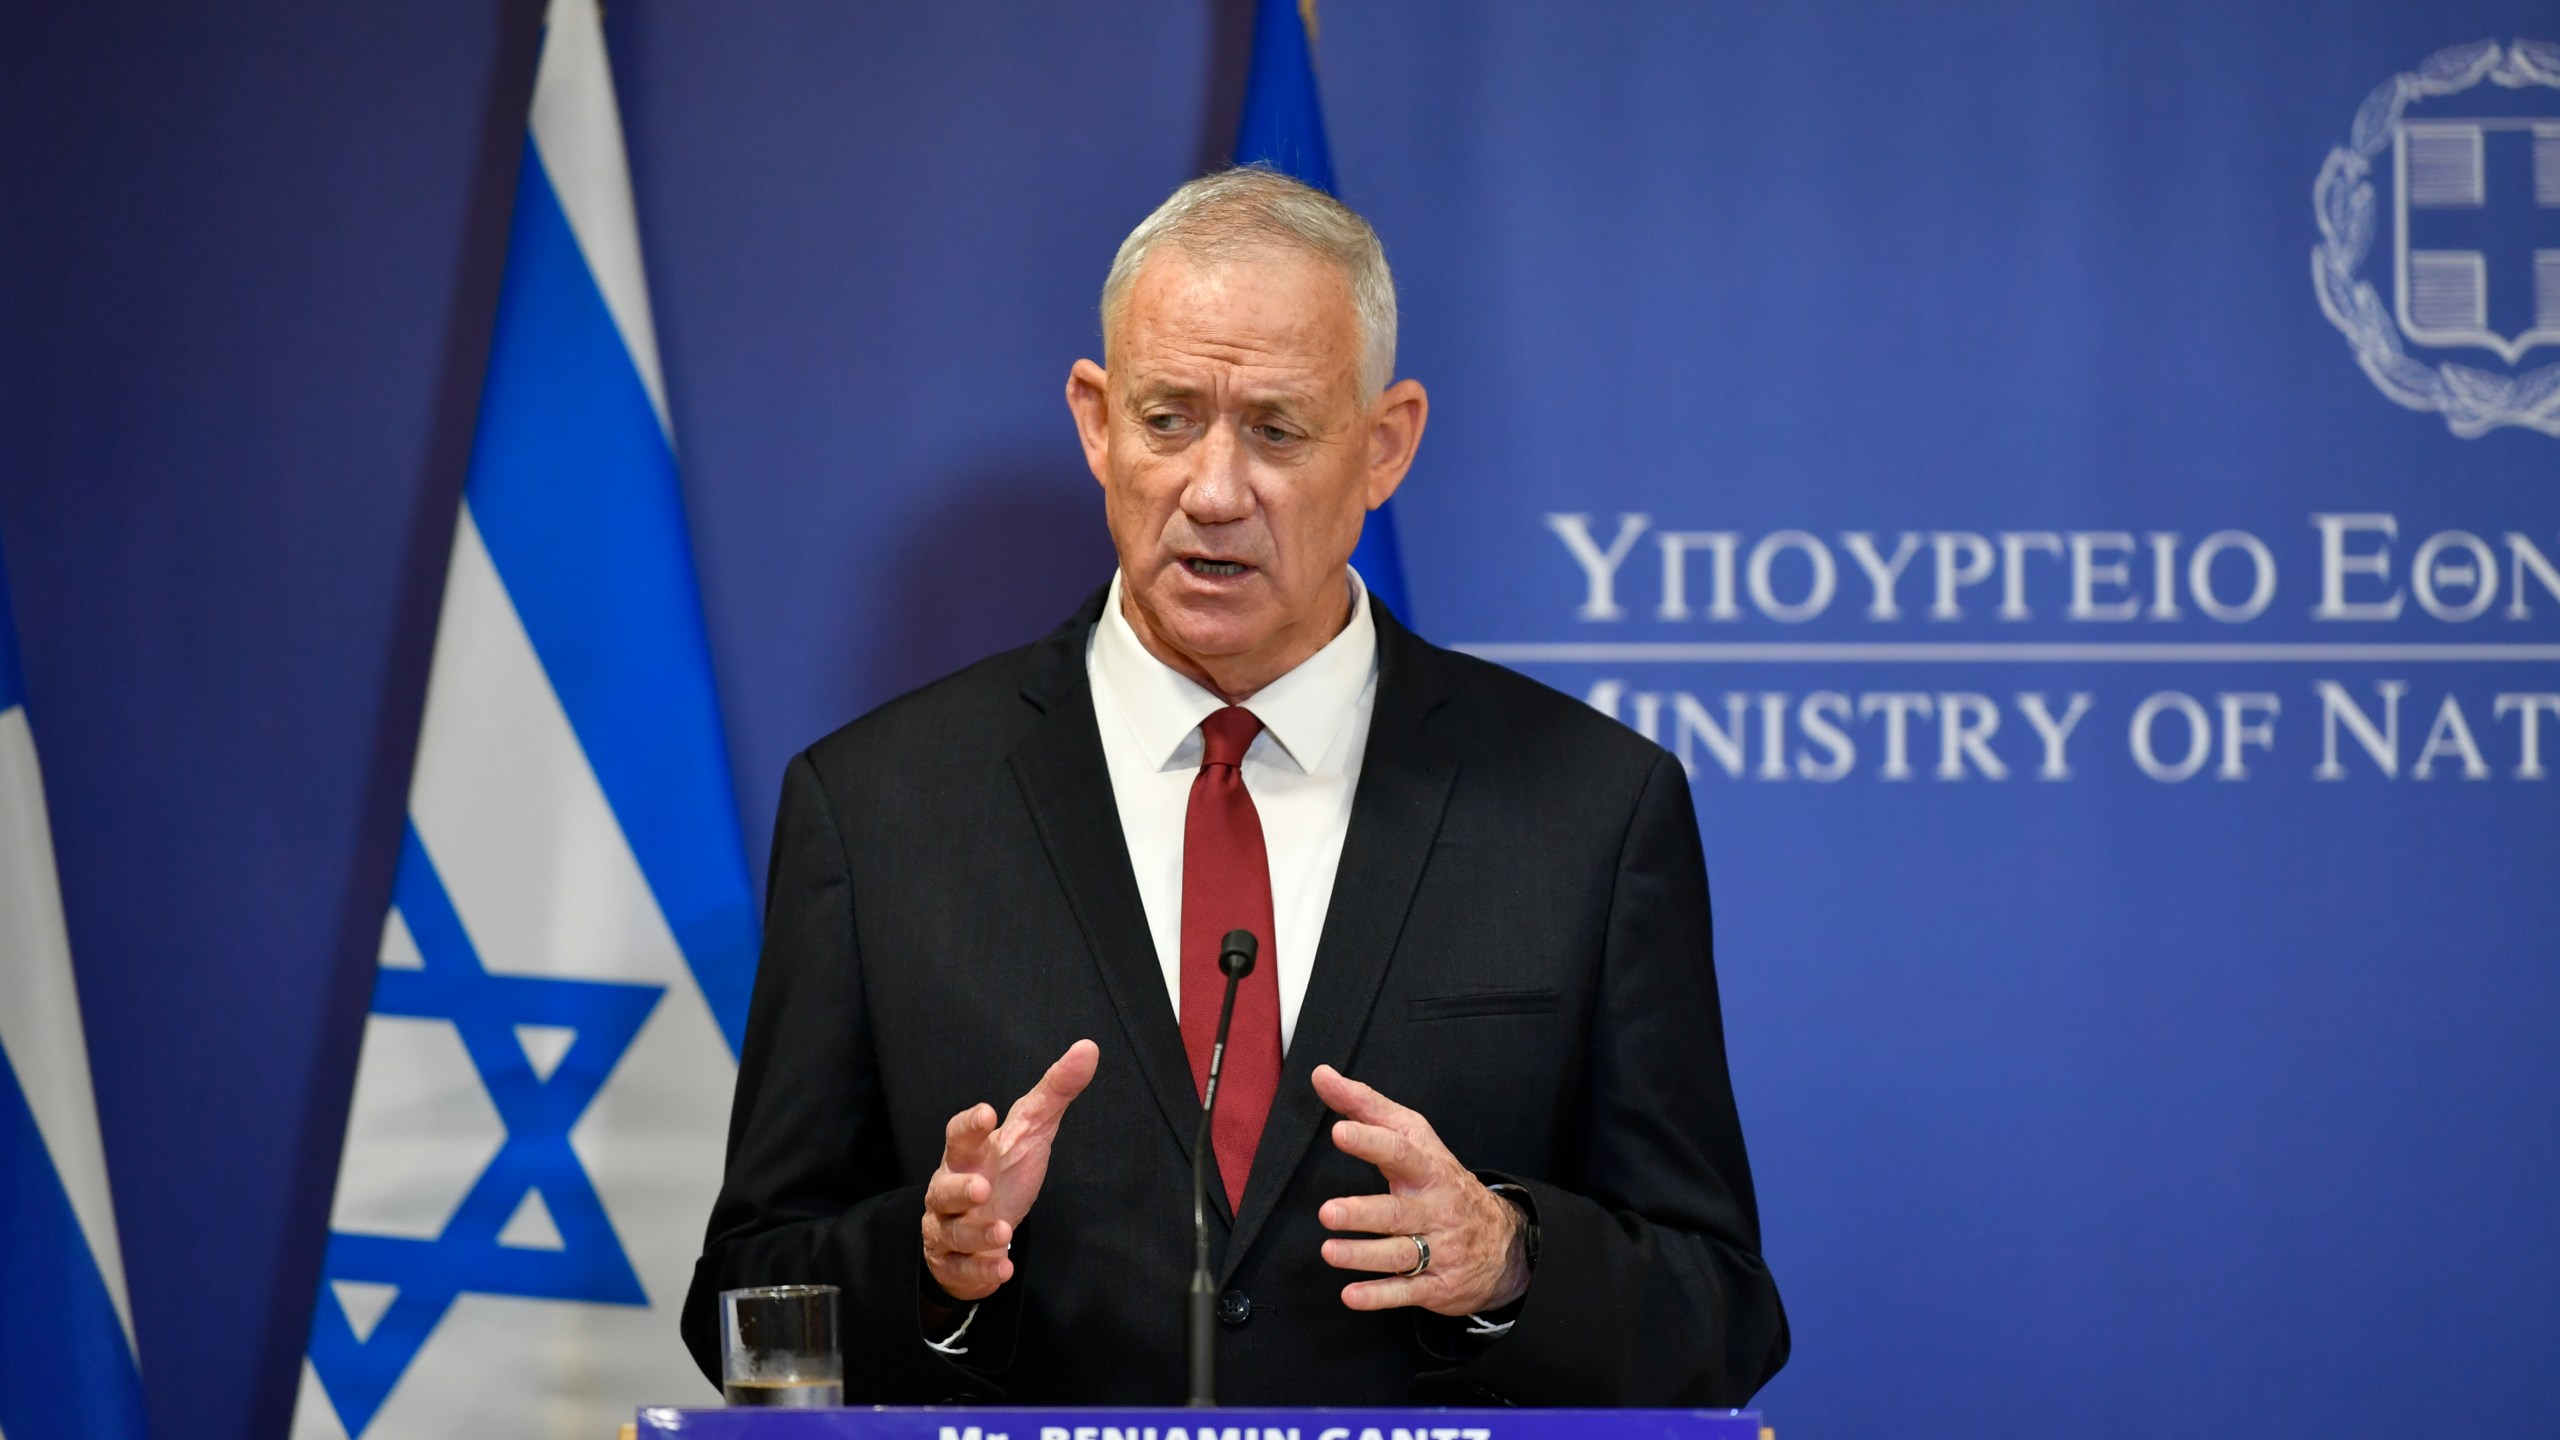 FILE - Israeli Defense Minister Benny Gantz, speaks during a joint press conference with his Greek counterpart Nikos Panagiotopoulos, at the Greek Ministry of Defence, in Athens, Greece, on Nov. 18, 2022. Benny Gantz, who is in Washington this week for meetings with U.S. leaders, is a crucial member of Israel’s War Cabinet. He is also the top political rival to Israeli Prime Minister Benjamin Netanyahu. Gantz is a centrist politician who joined Netanyahu’s ultranationalist and religious government soon after Hamas’ Oct. 7 attack on southern Israel. (AP Photo/Michael Varaklas, File)